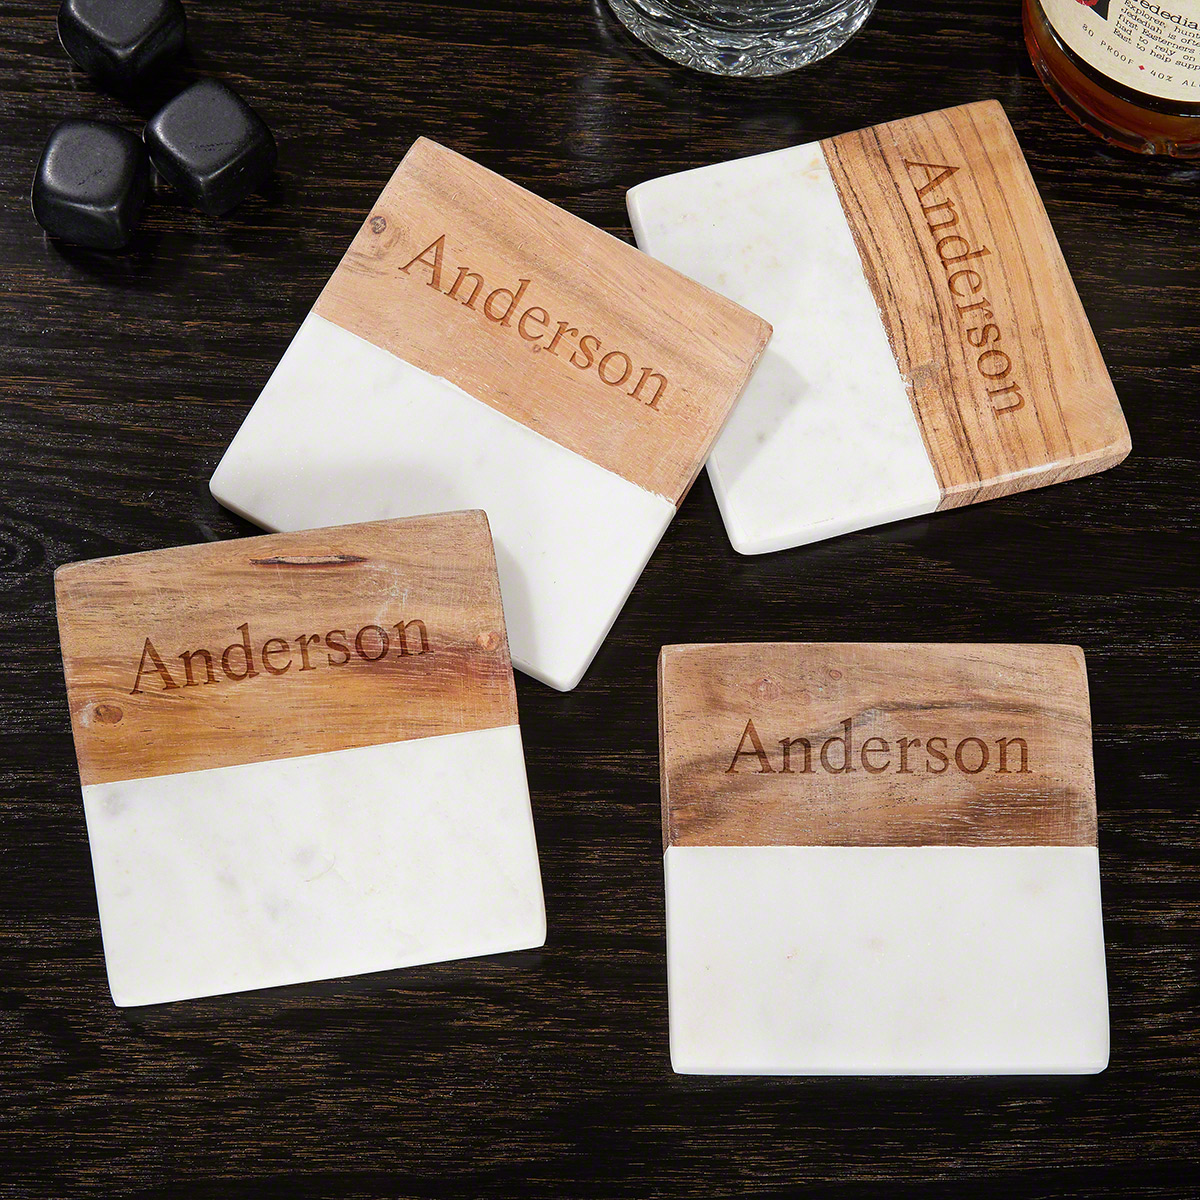 Set of 4 Wood Edge Farmhouse Rustic Coaster Housewarming Gift with Protective Cork Backer Questech Wood Grain Drink Coasters Brushed Nickel Metal Finish 